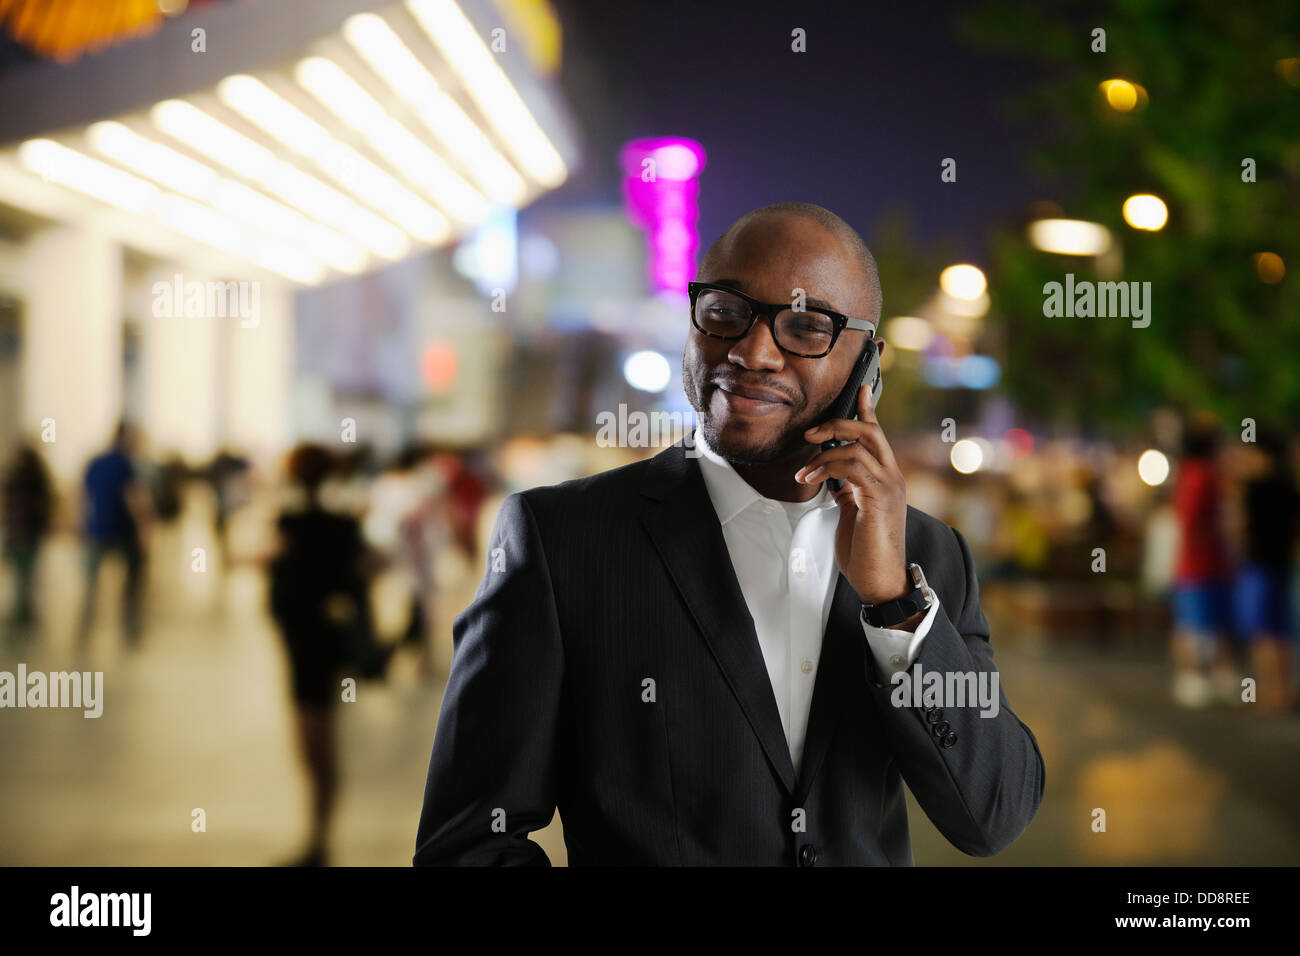 Black businessman talking on cell phone on city street Banque D'Images